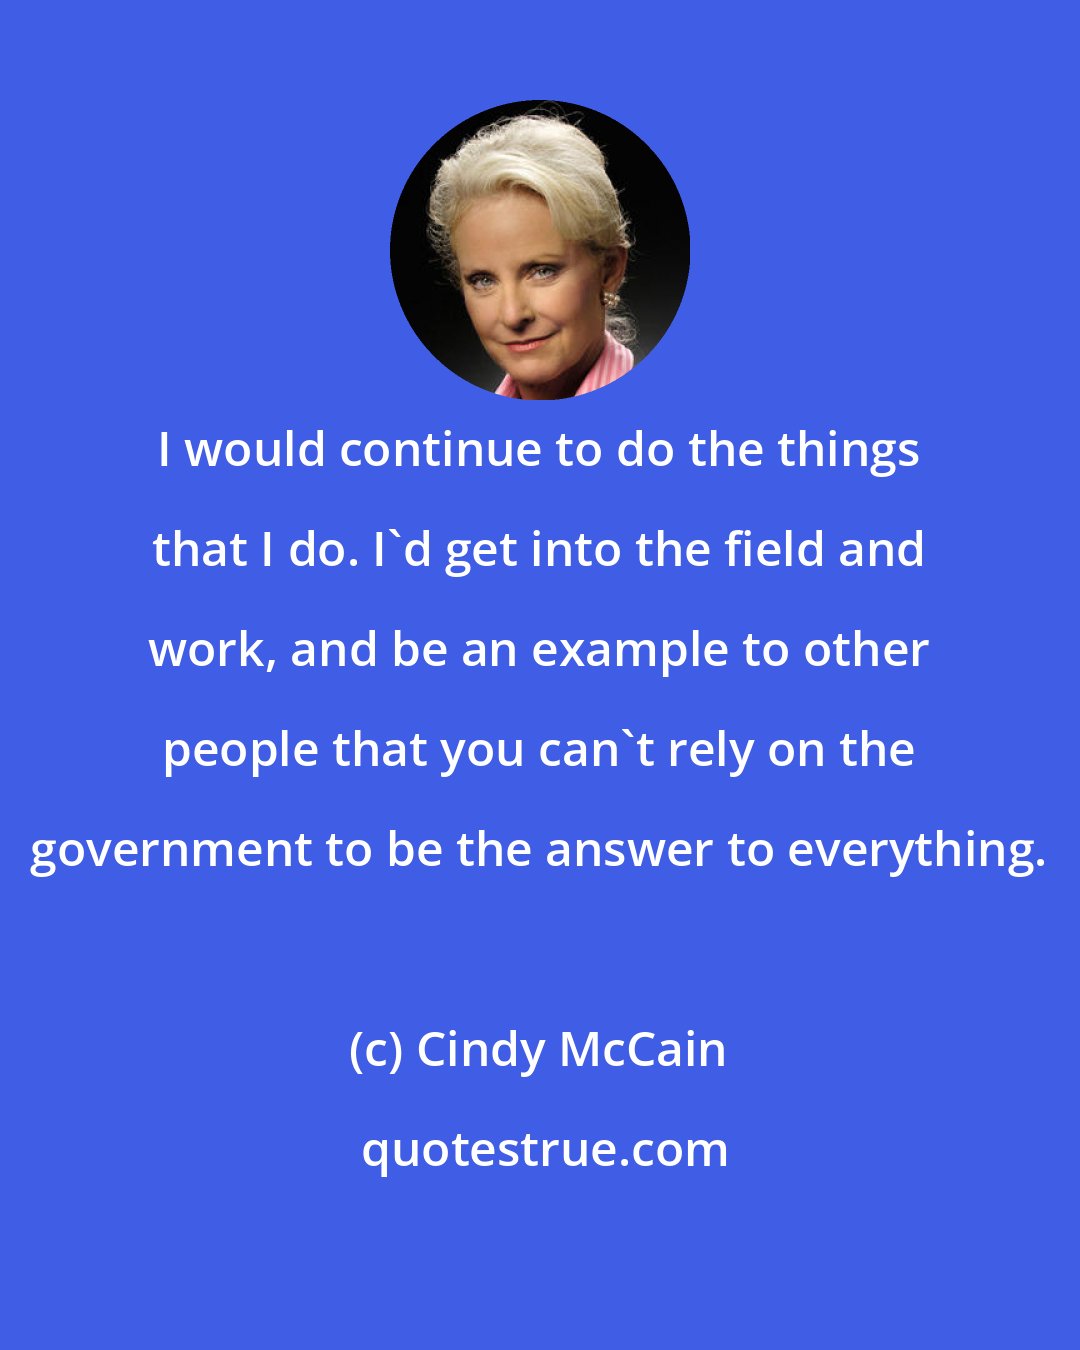 Cindy McCain: I would continue to do the things that I do. I'd get into the field and work, and be an example to other people that you can't rely on the government to be the answer to everything.